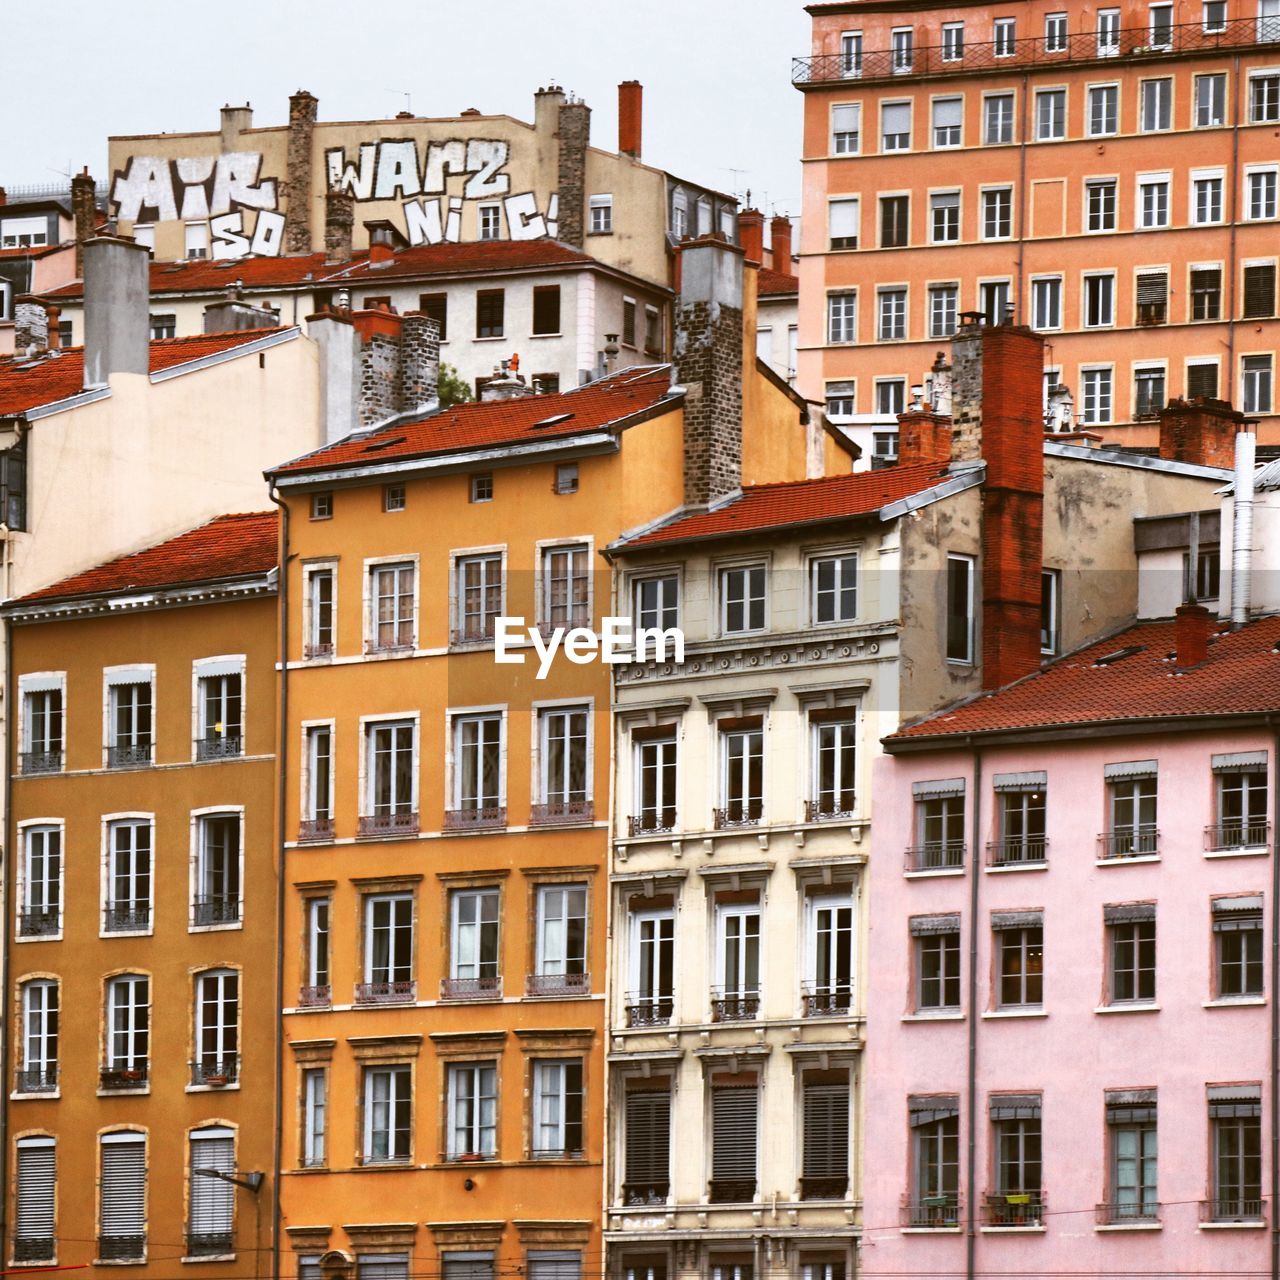 Low angle view of buildings in city lyon